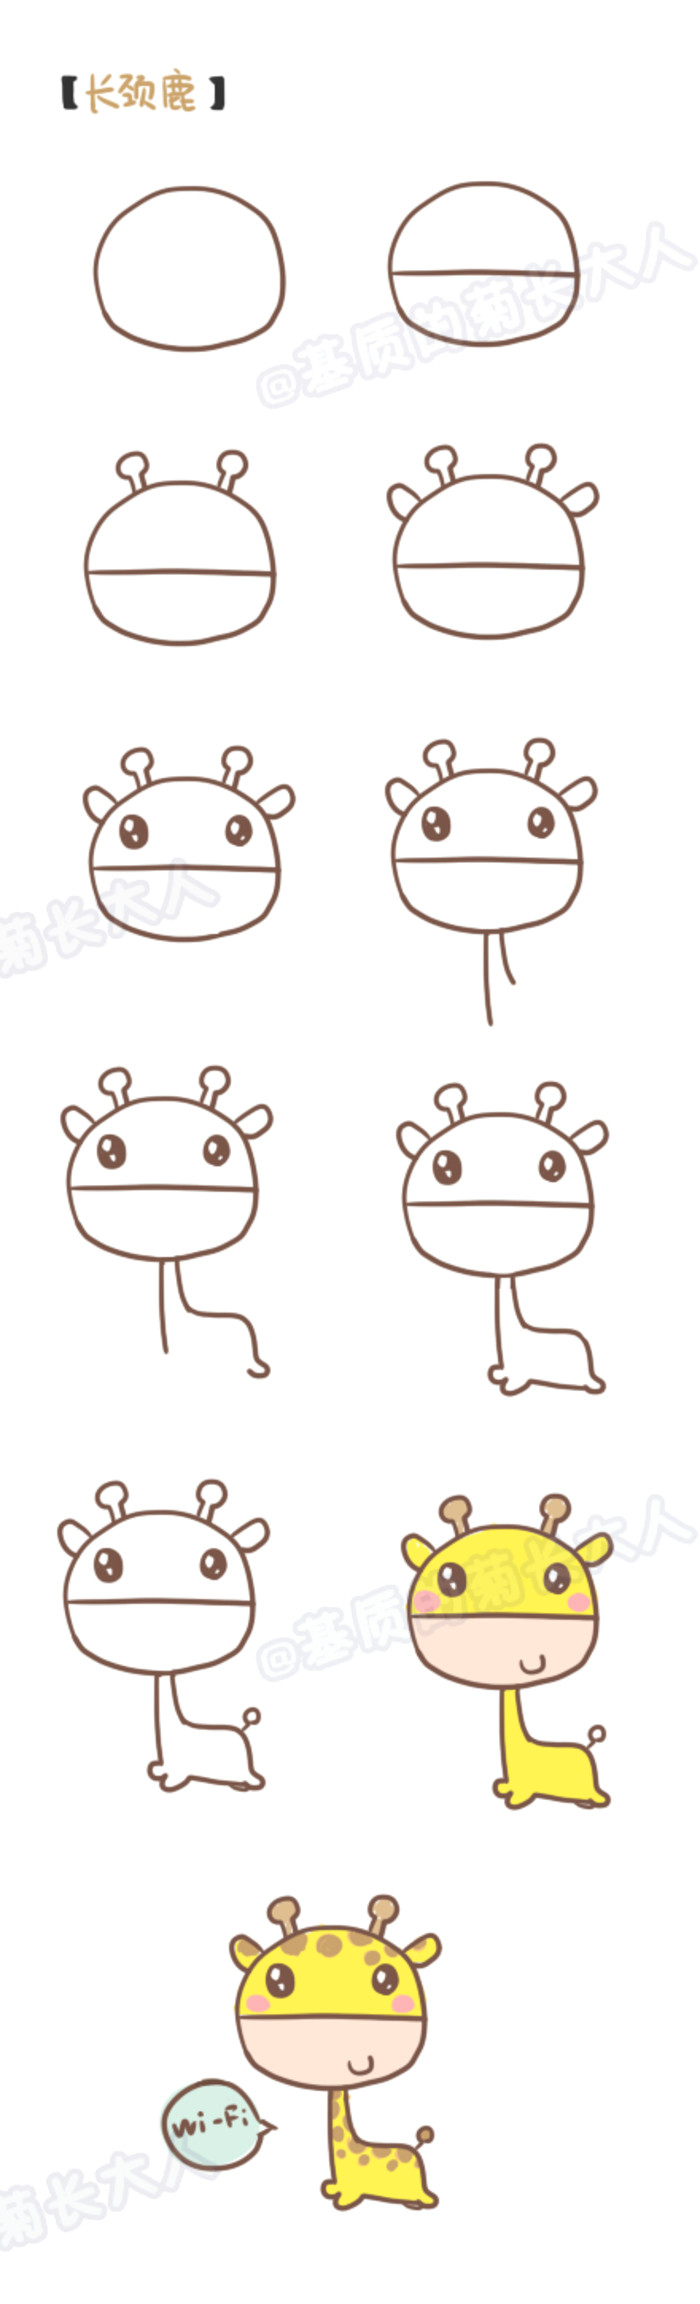 Baby Animal Drawings Easy How to Draw A Giraffe Daisy Grew Up In Person From the